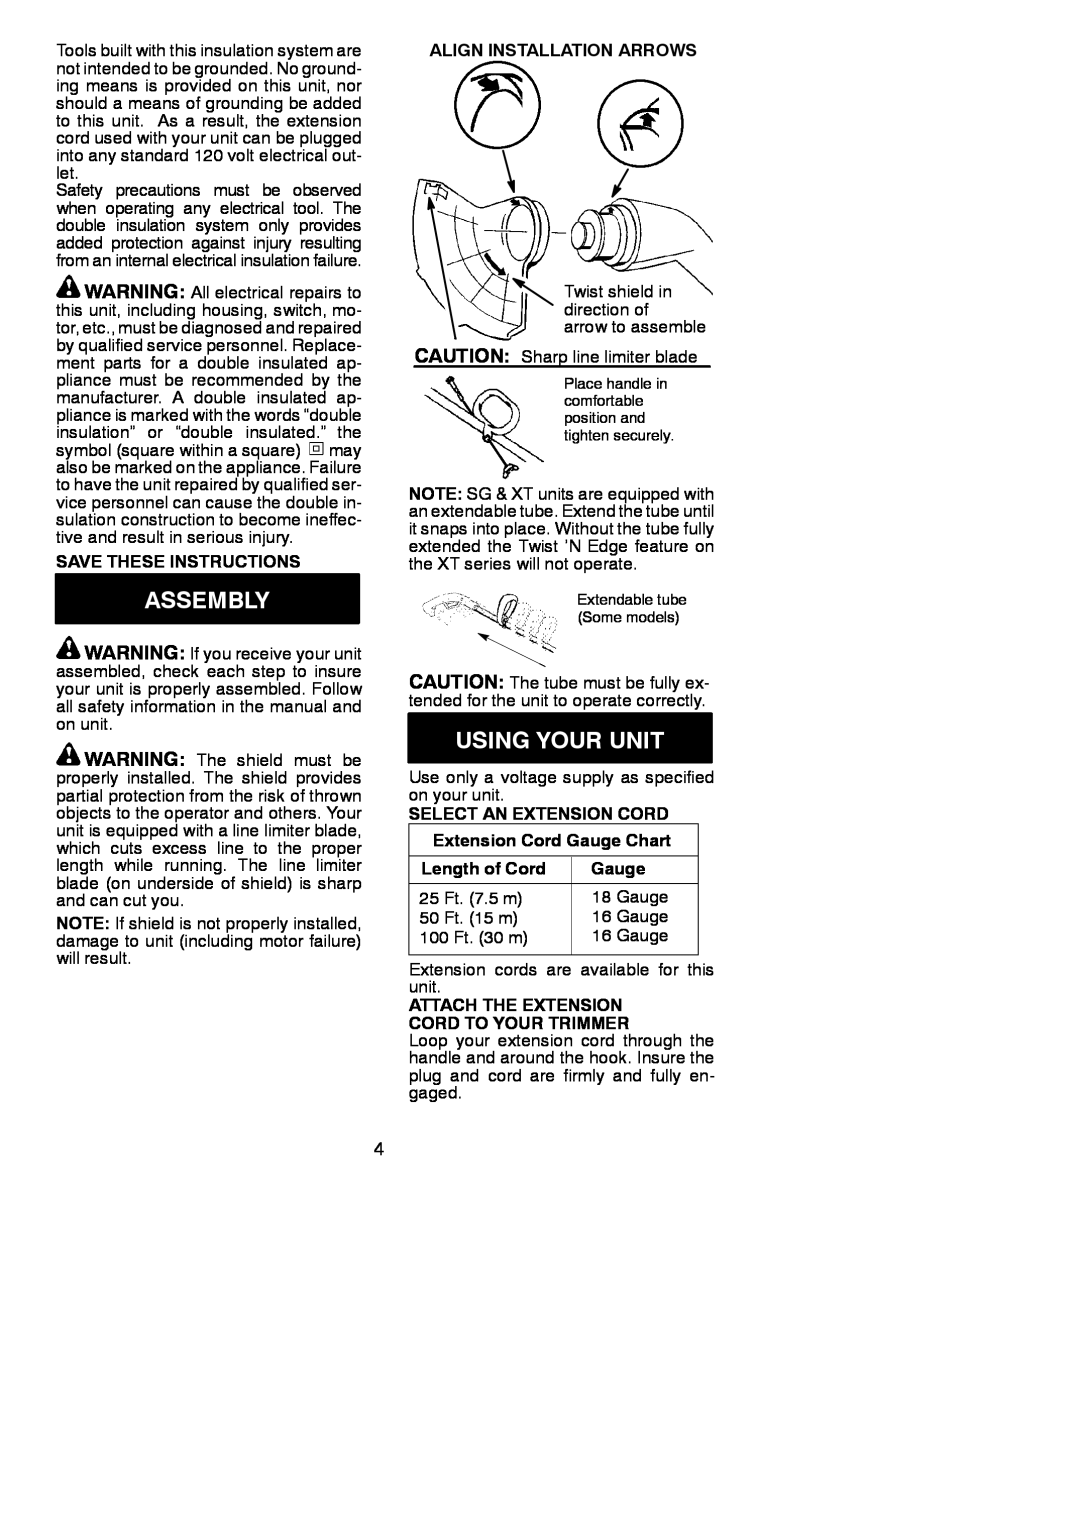 Weed Eater 952711329 Assembly, Using Your Unit, Save These Instructions, Align Installation Arrows, Length of Cord, Gauge 